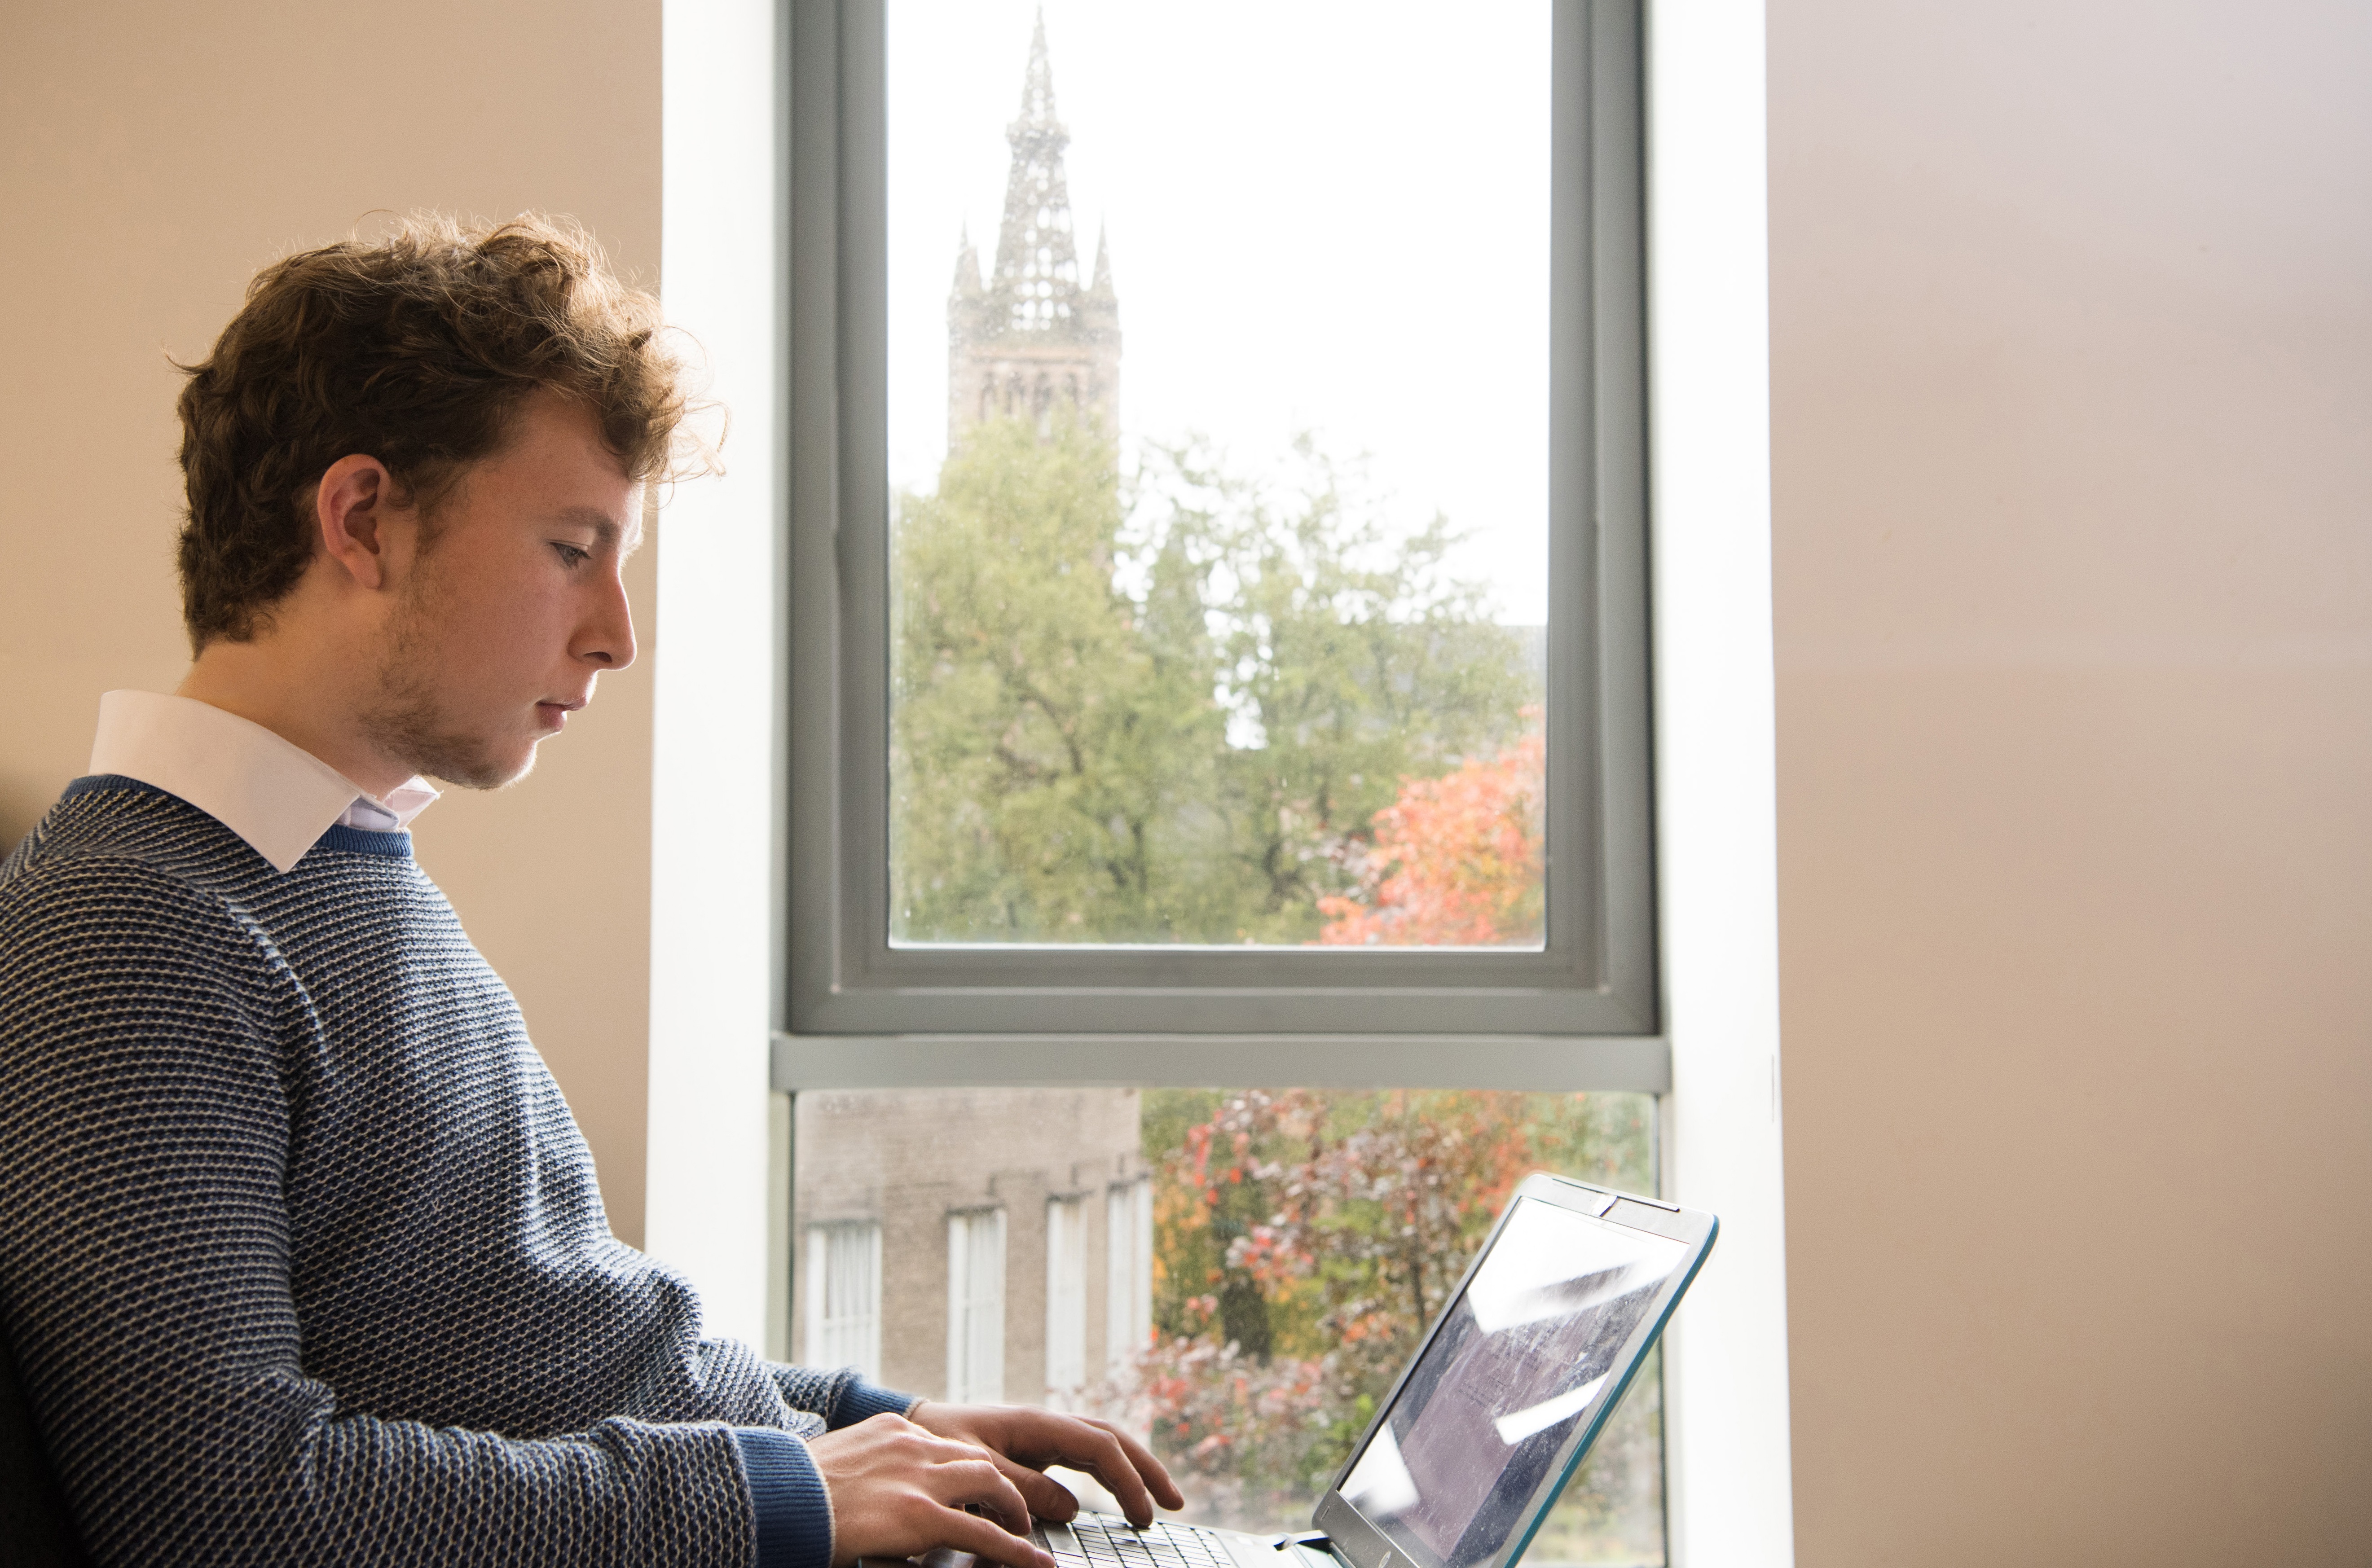 Student on laptop in front of window framing university tower